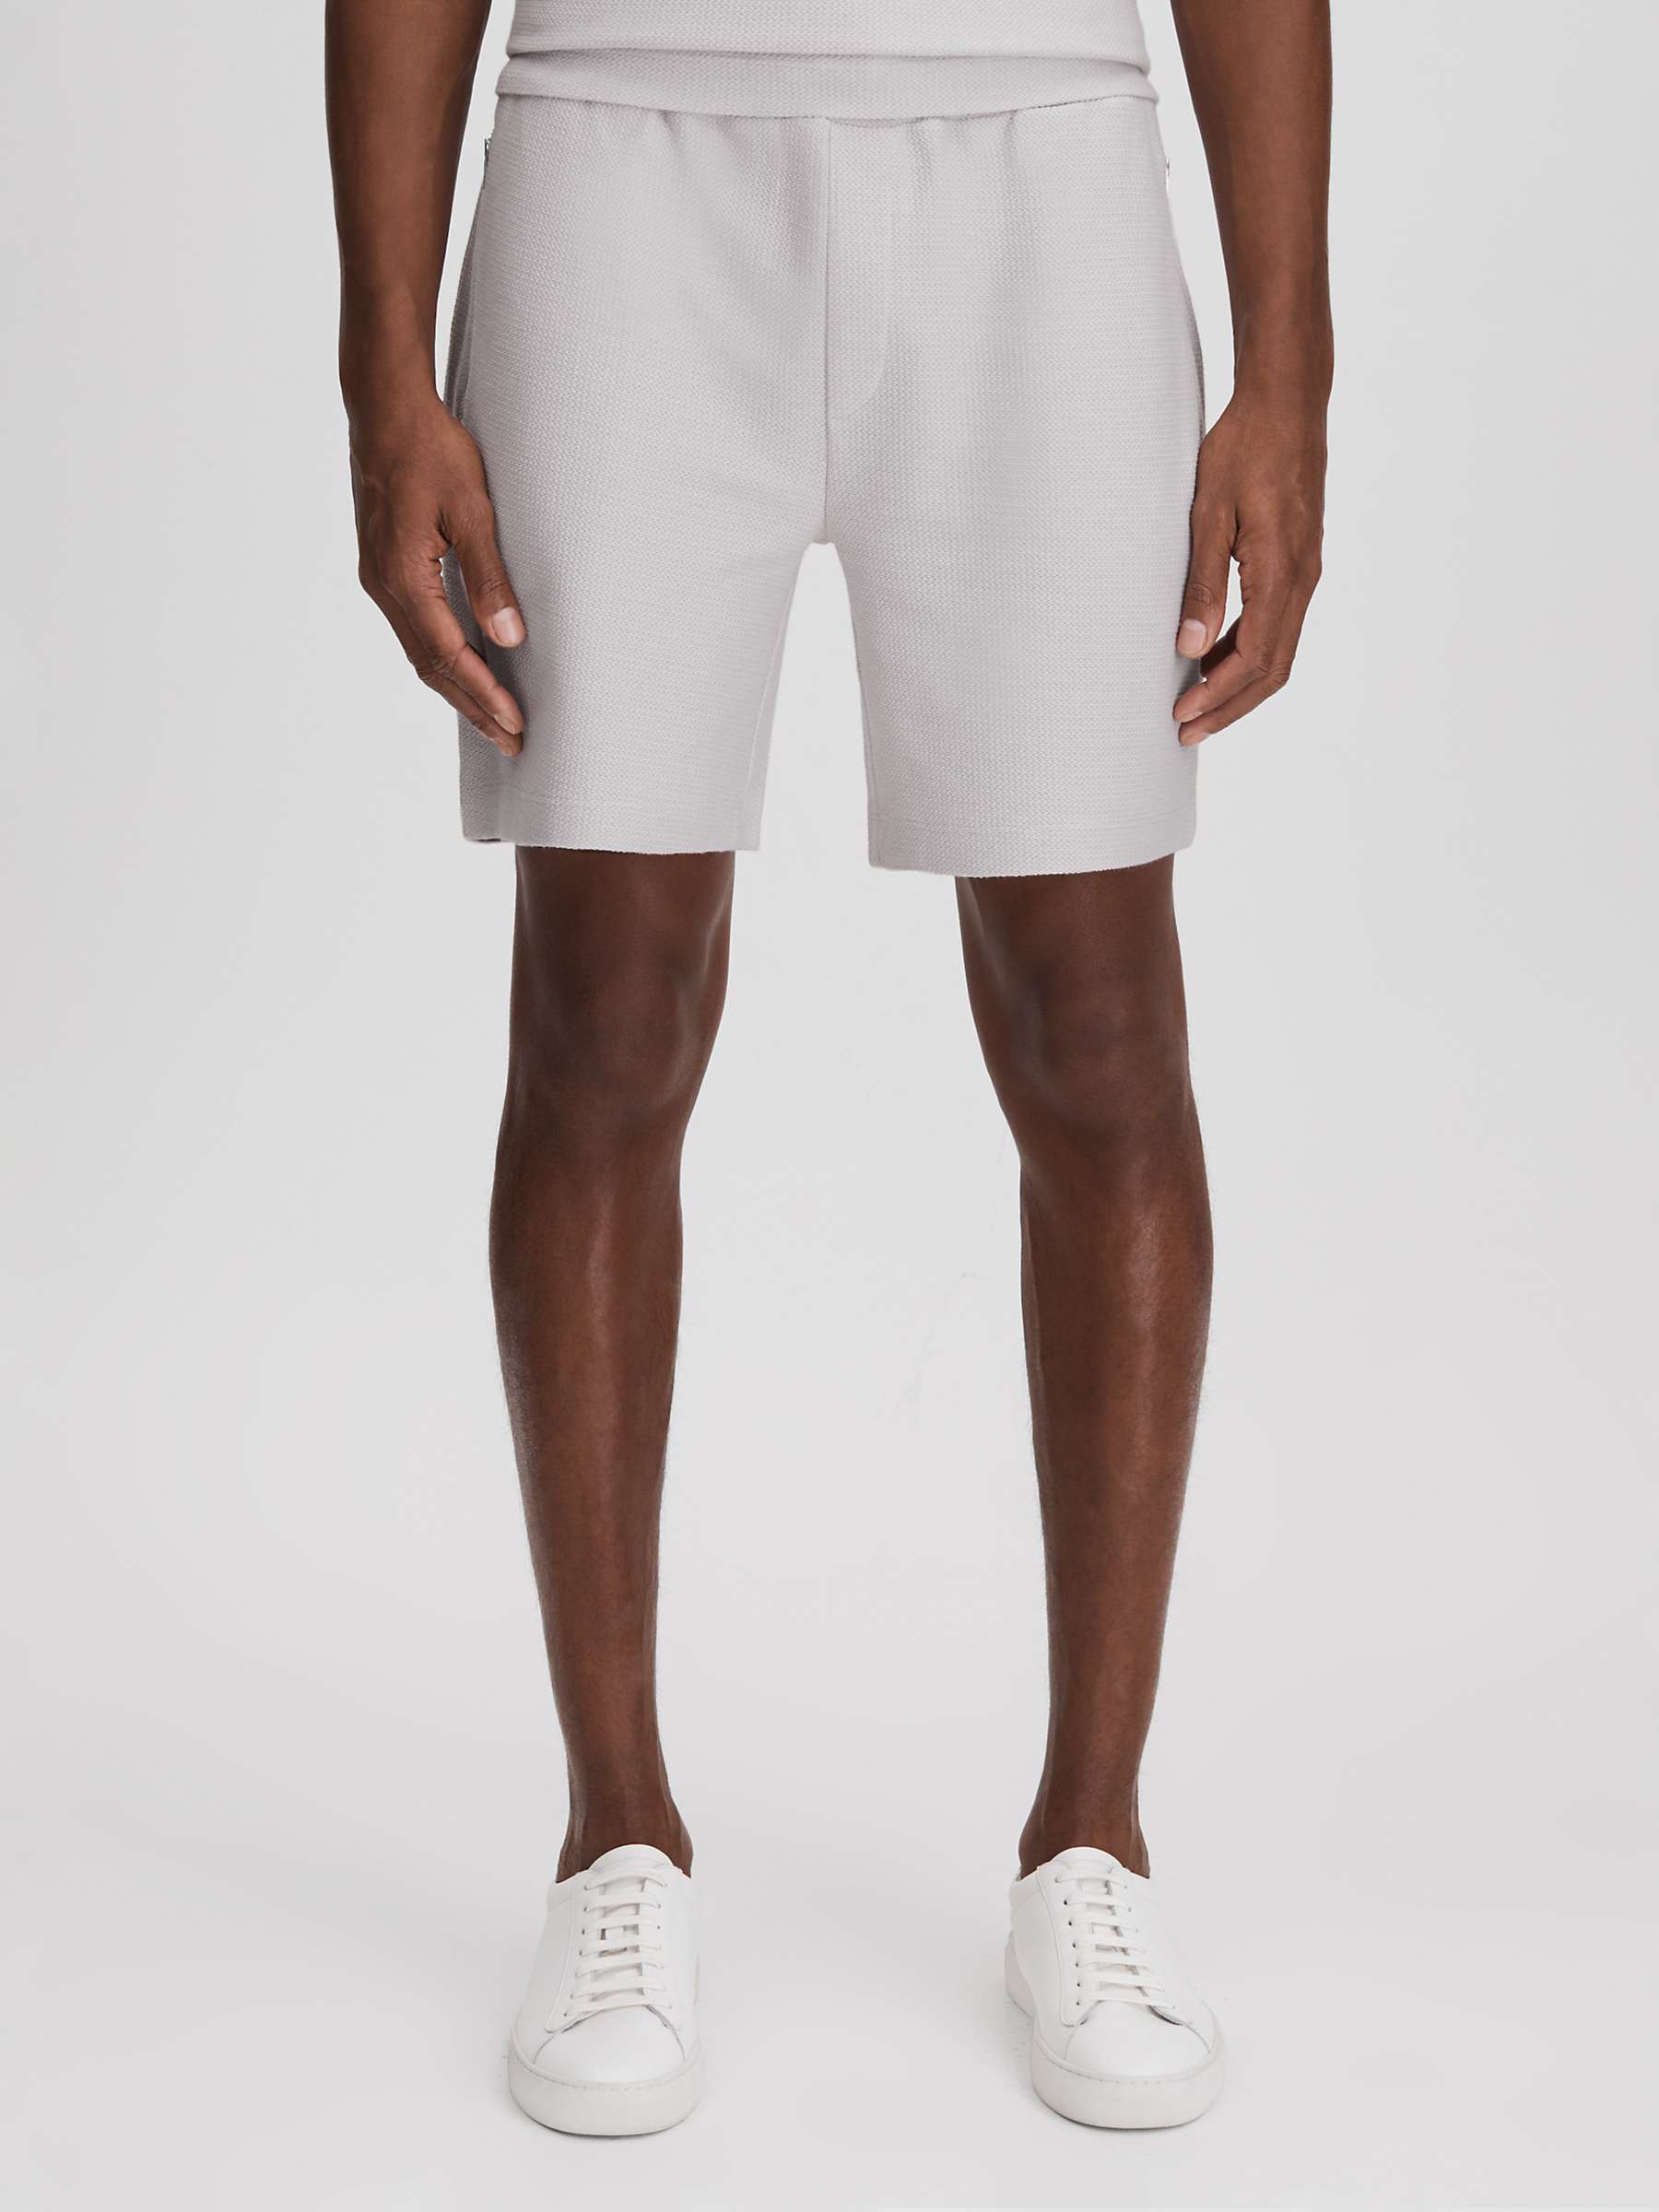 Buy Reiss Hester Textured Drawstring Shorts, Silver Online at johnlewis.com